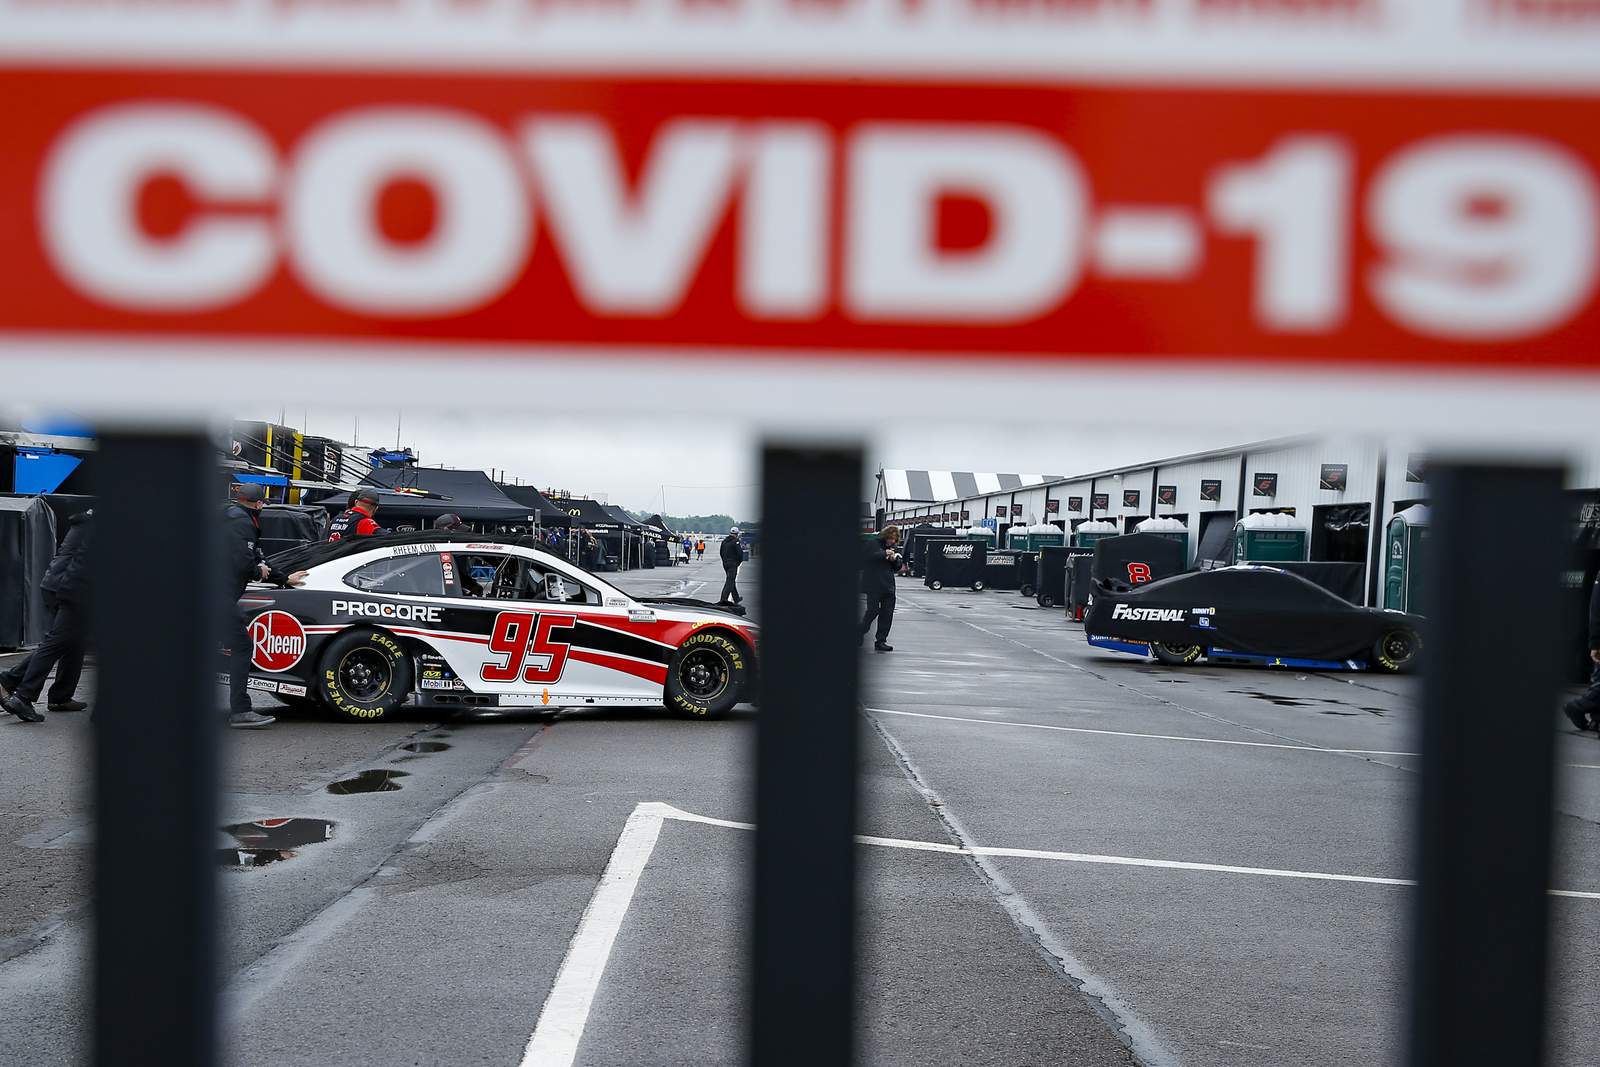 NASCAR drivers cautious of COVID-19 as playoffs begin